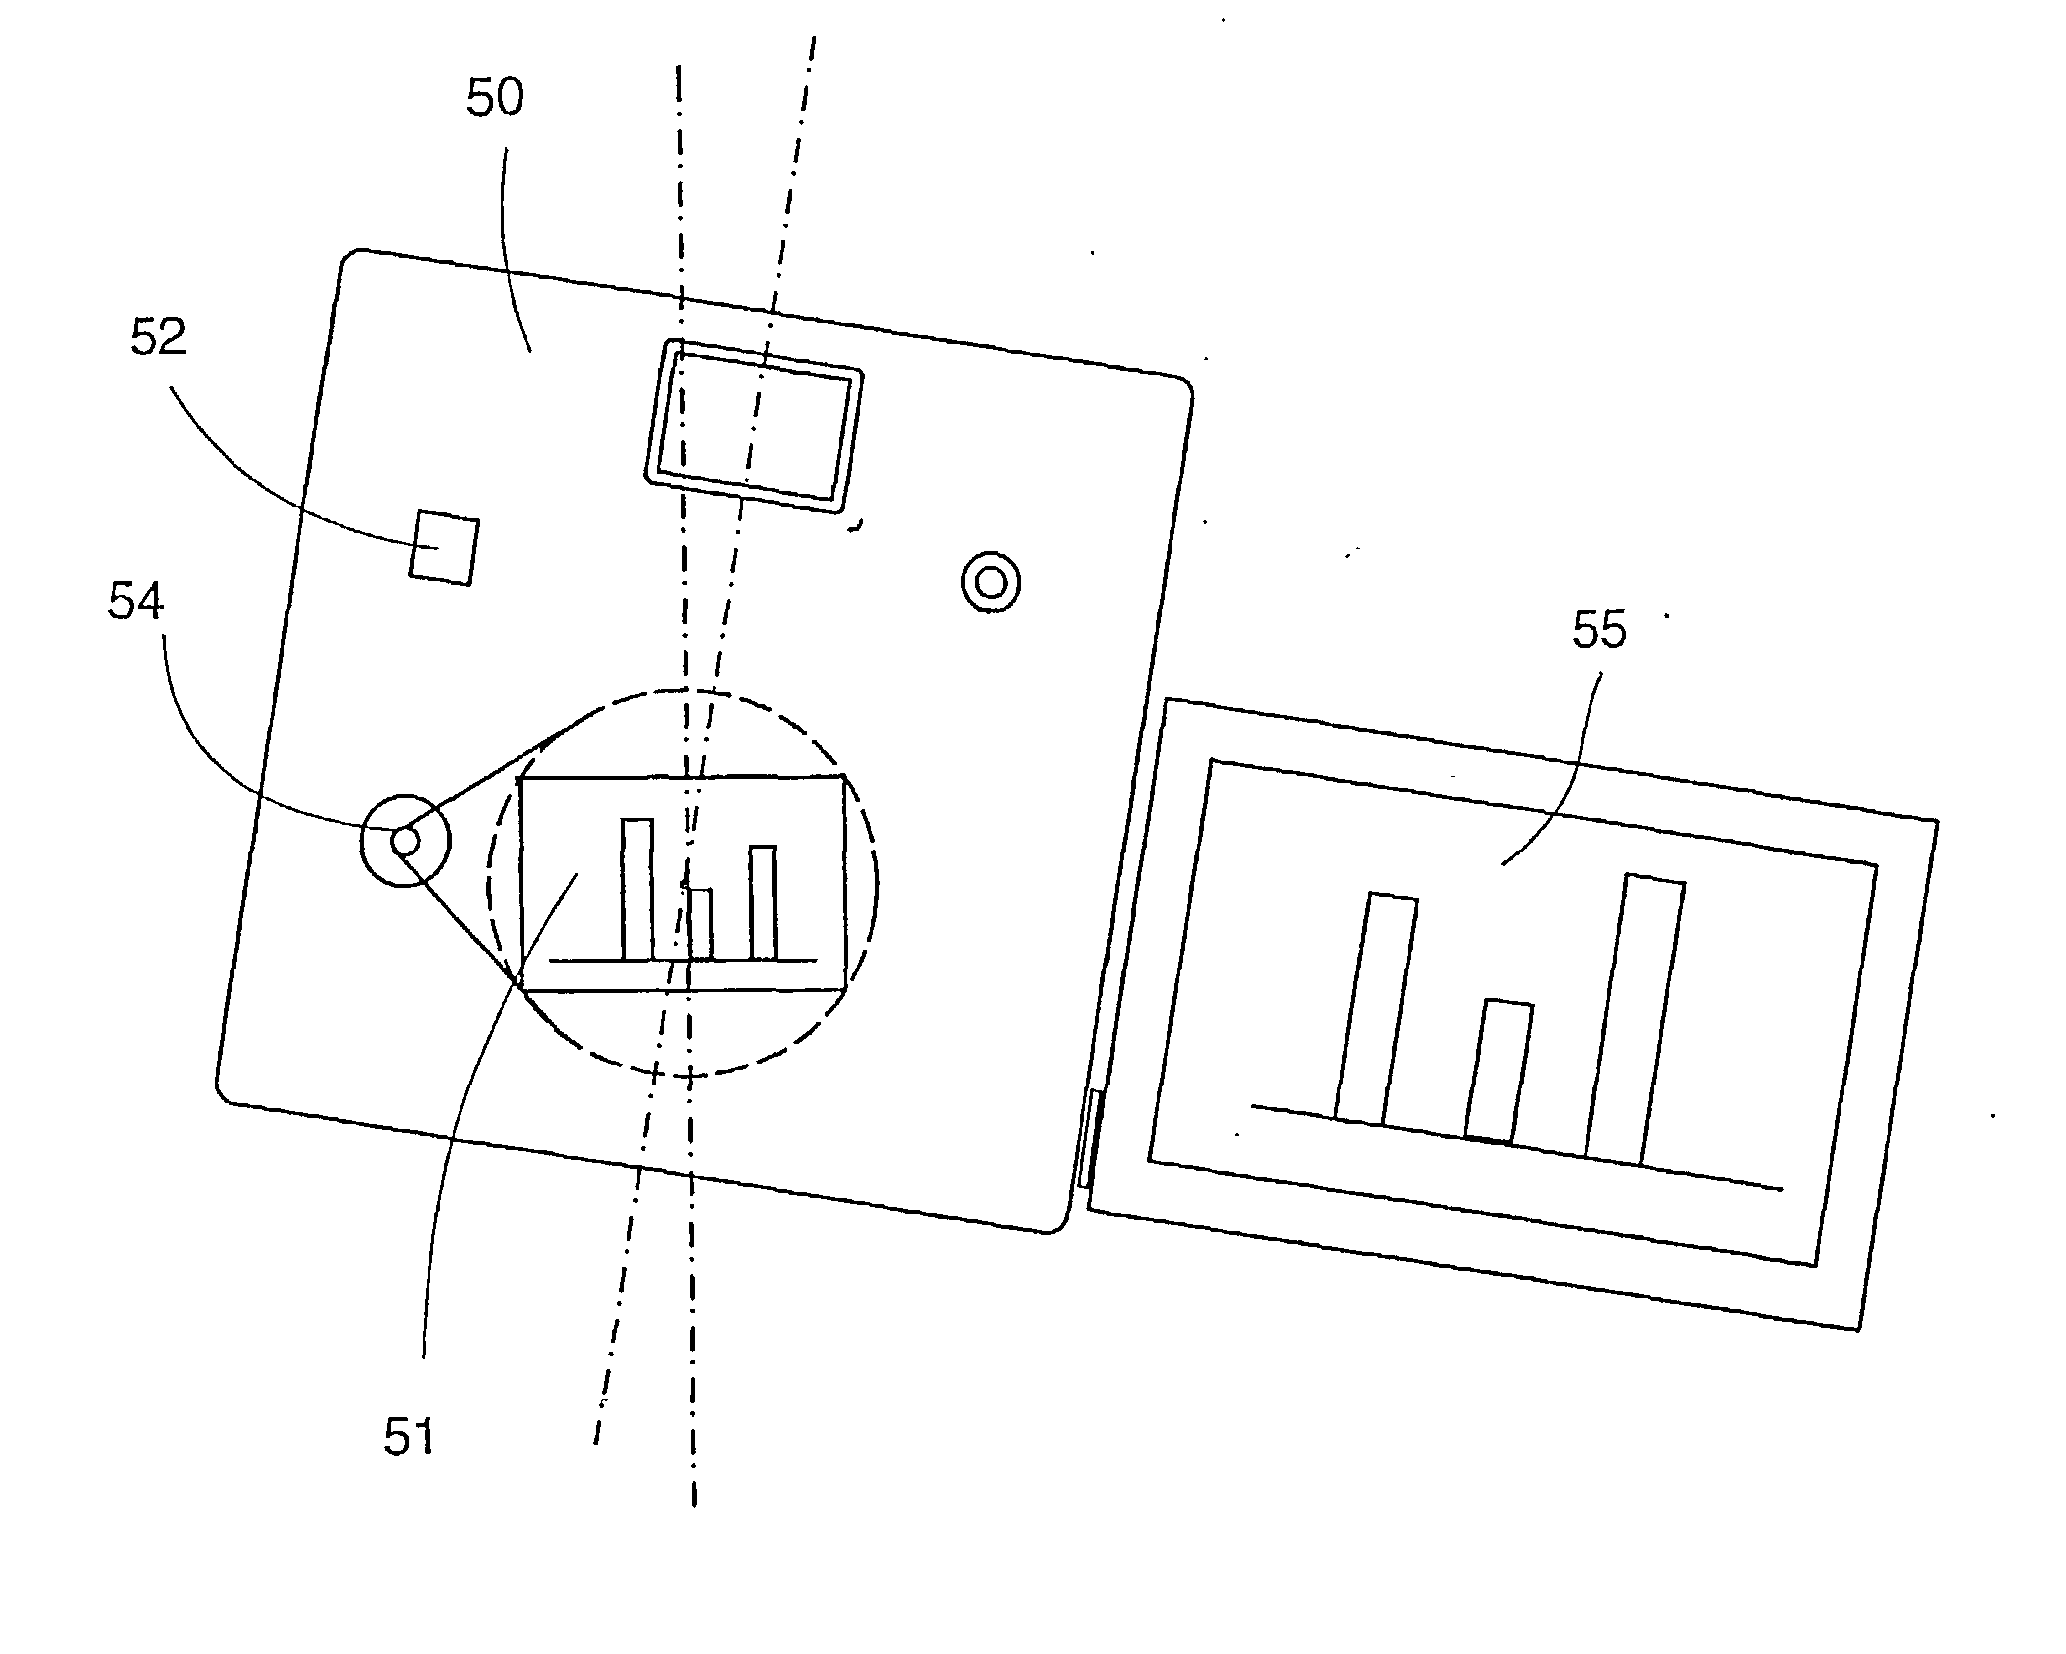 Digital camera or digital video camera and method for acquiring images